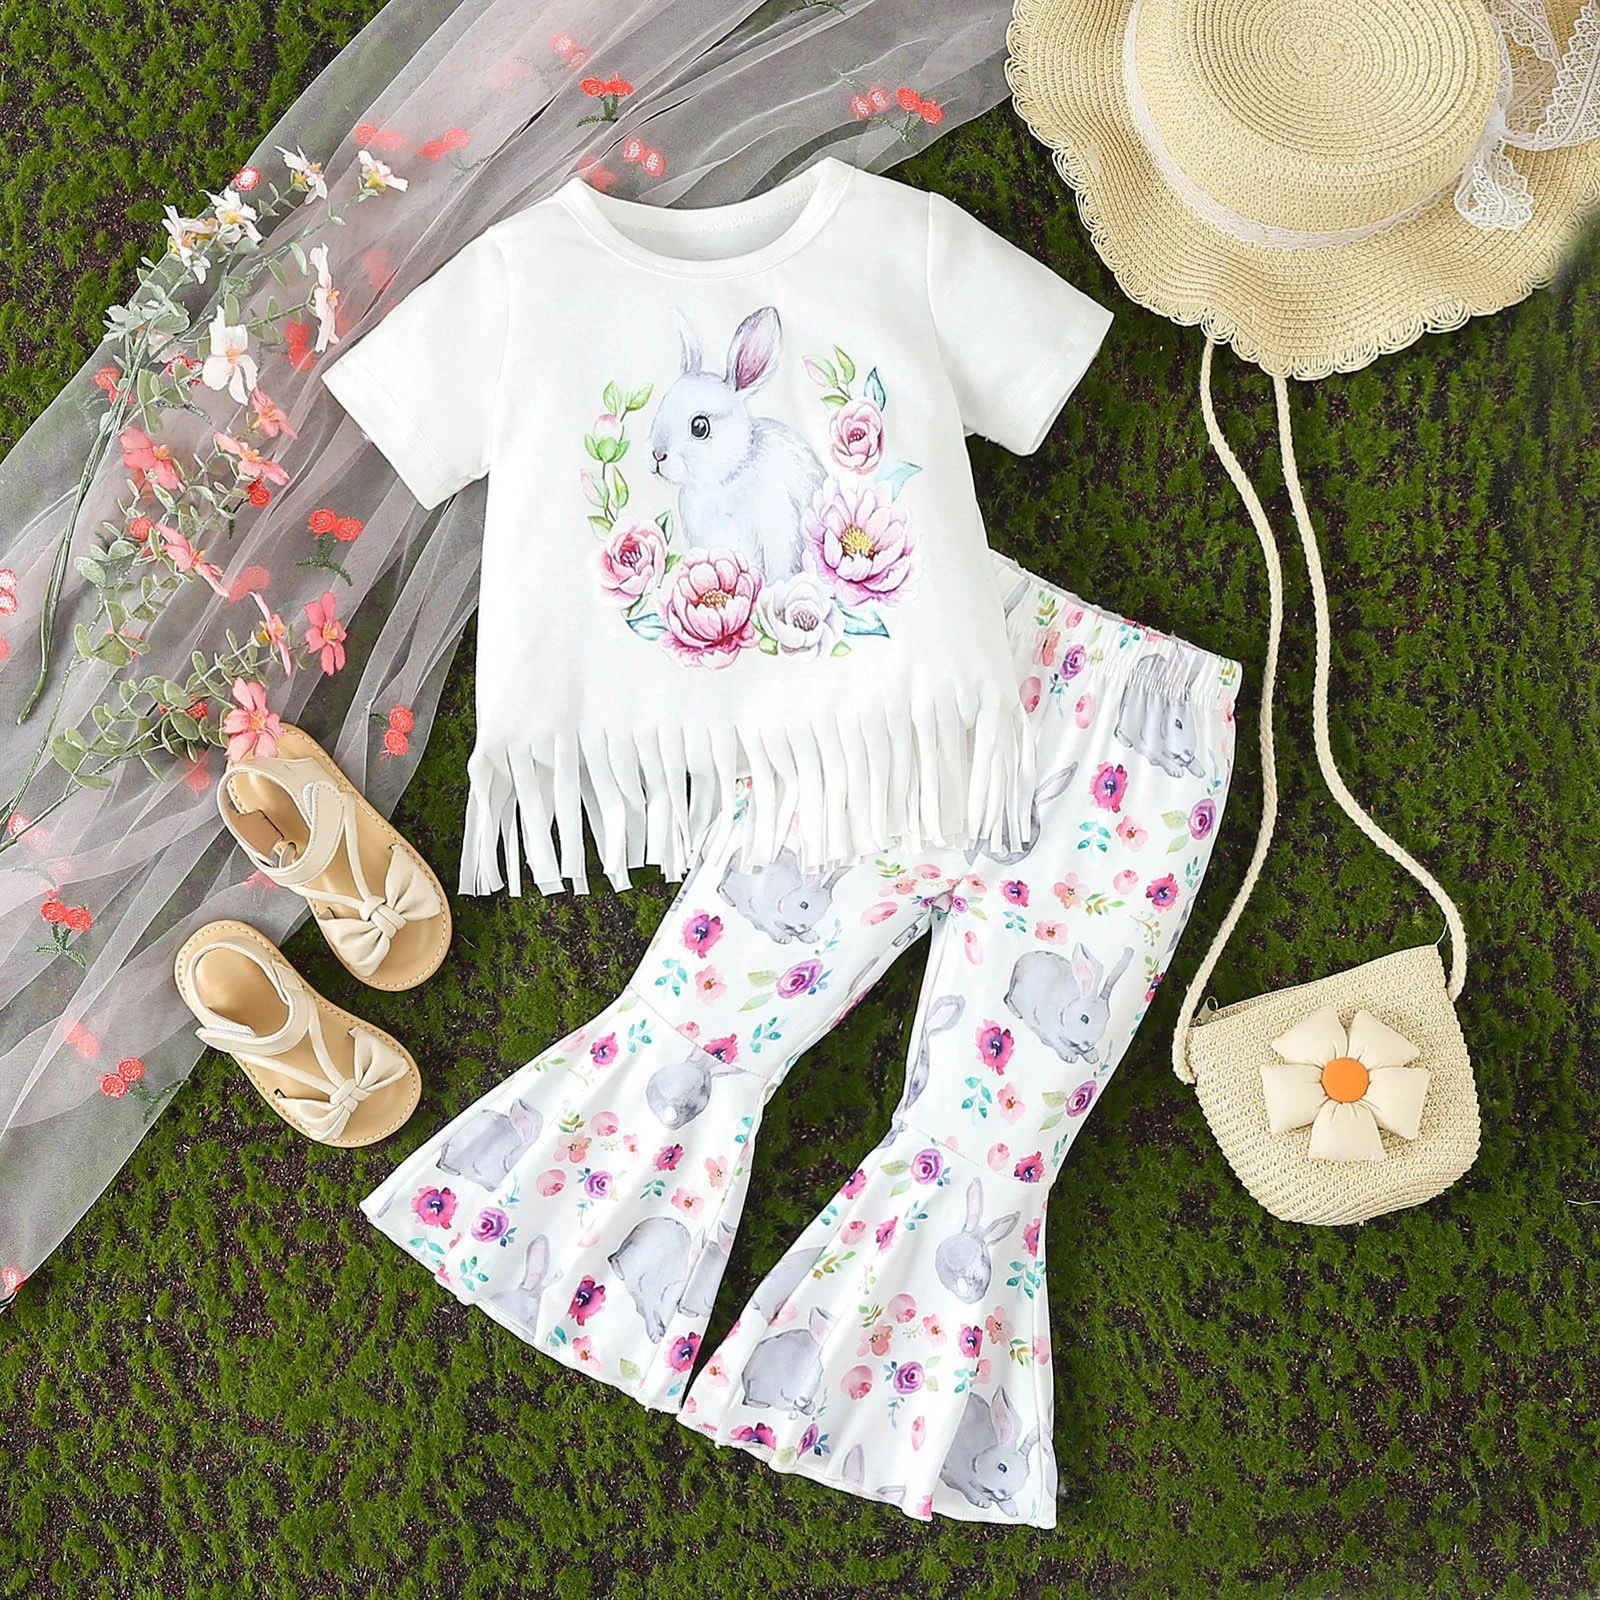 

Toddler Girls Easter Clothes Sets Short Sleeve Tassel Hem T-shirt Tops Floral Bunny Prints Flared Pants Two Piece Outfits 9M-4Y